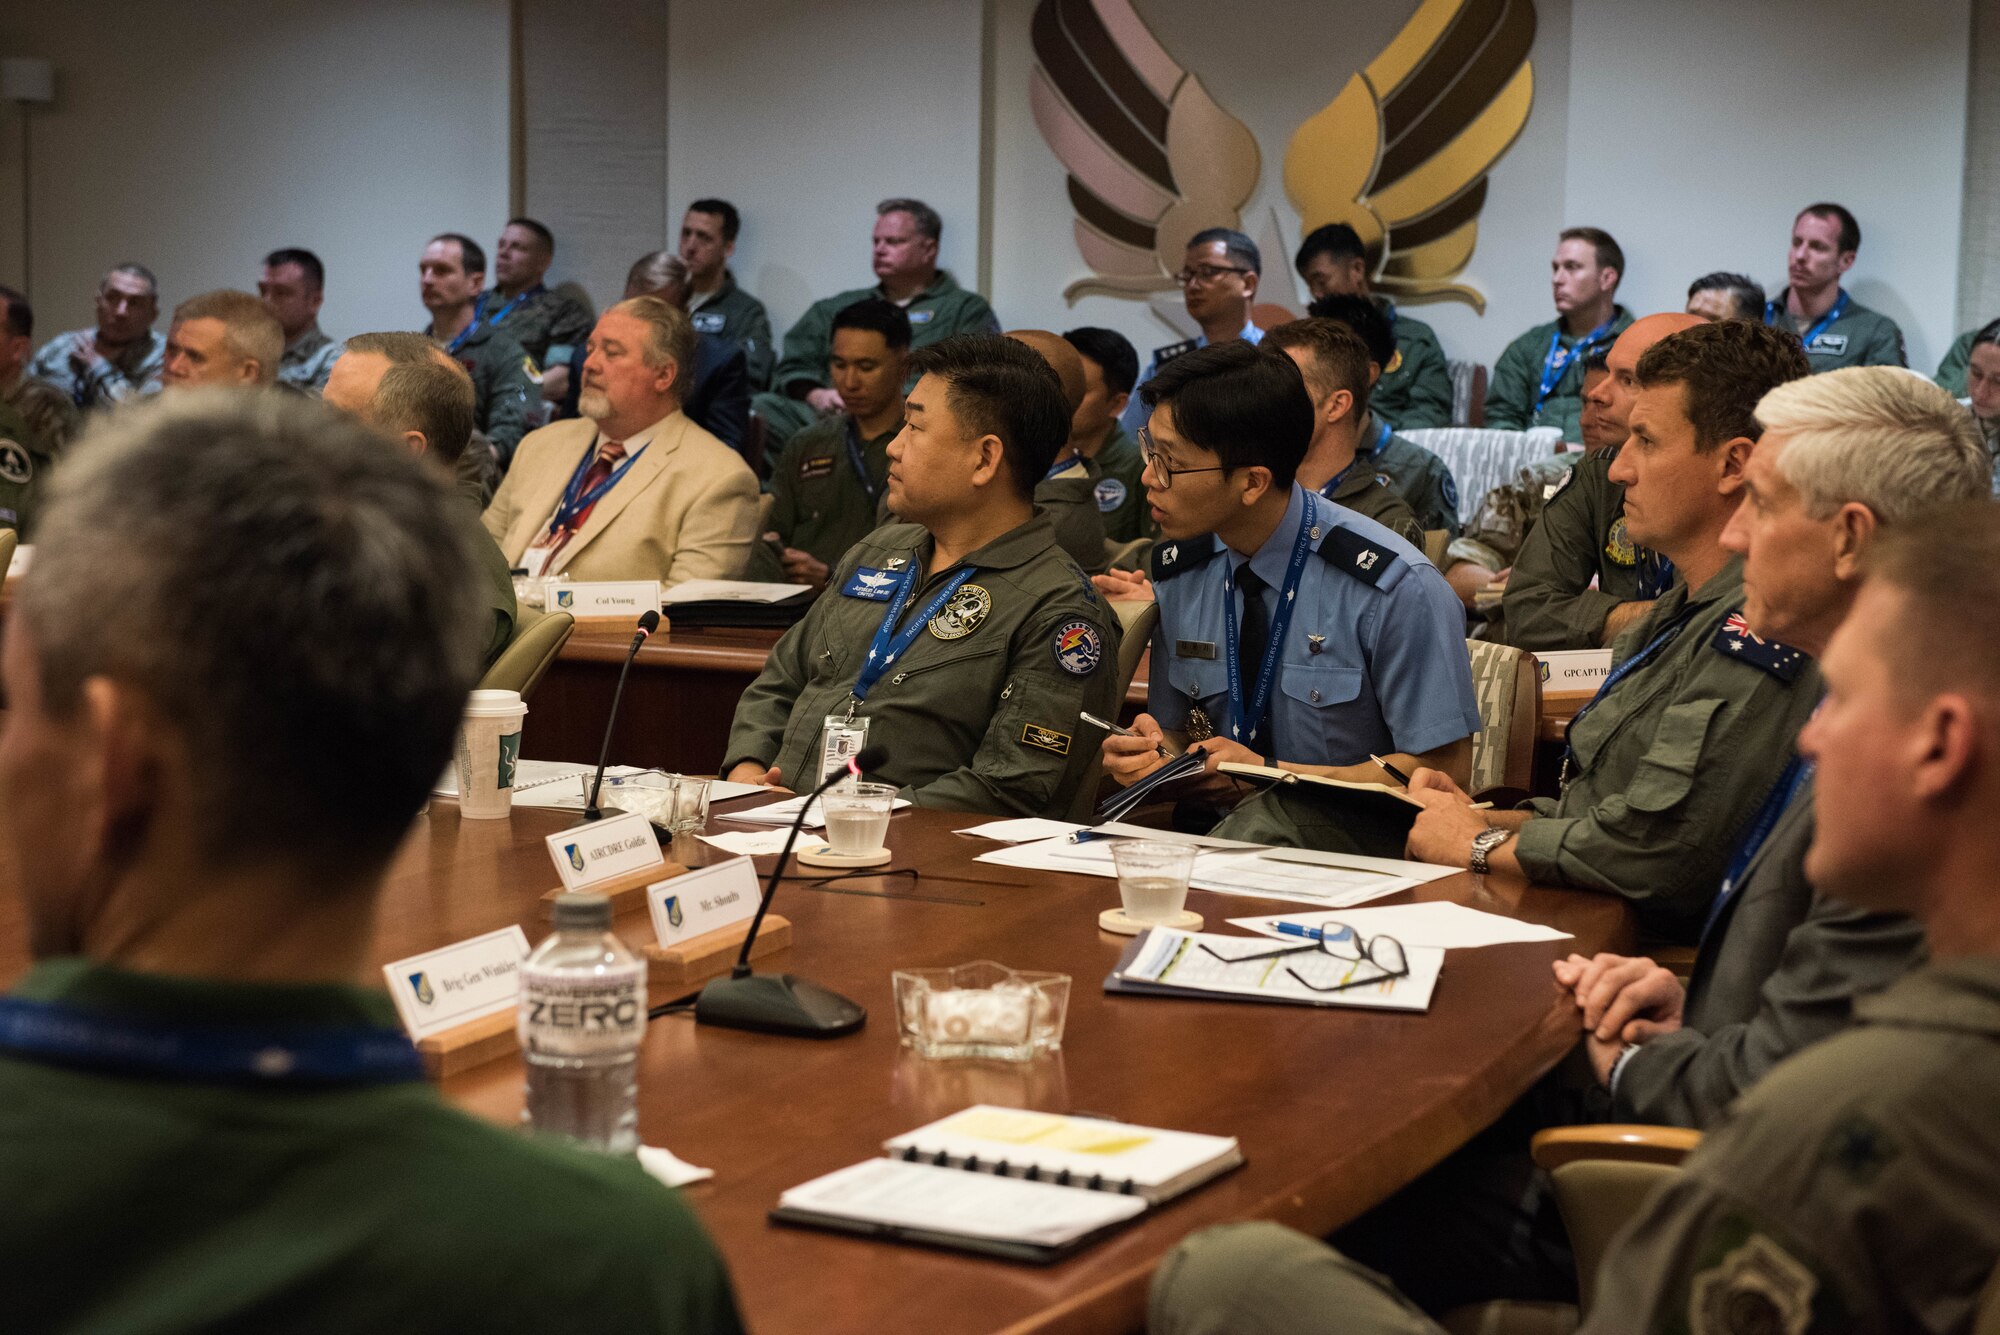 Members of the Pacific F-35 Users Group Conference listen to opening remarks given by the Pacific Air Forces commander at Headquarters PACAF, Joint Base Pearl Harbor-Hickam, Hawaii, March 12, 2019.